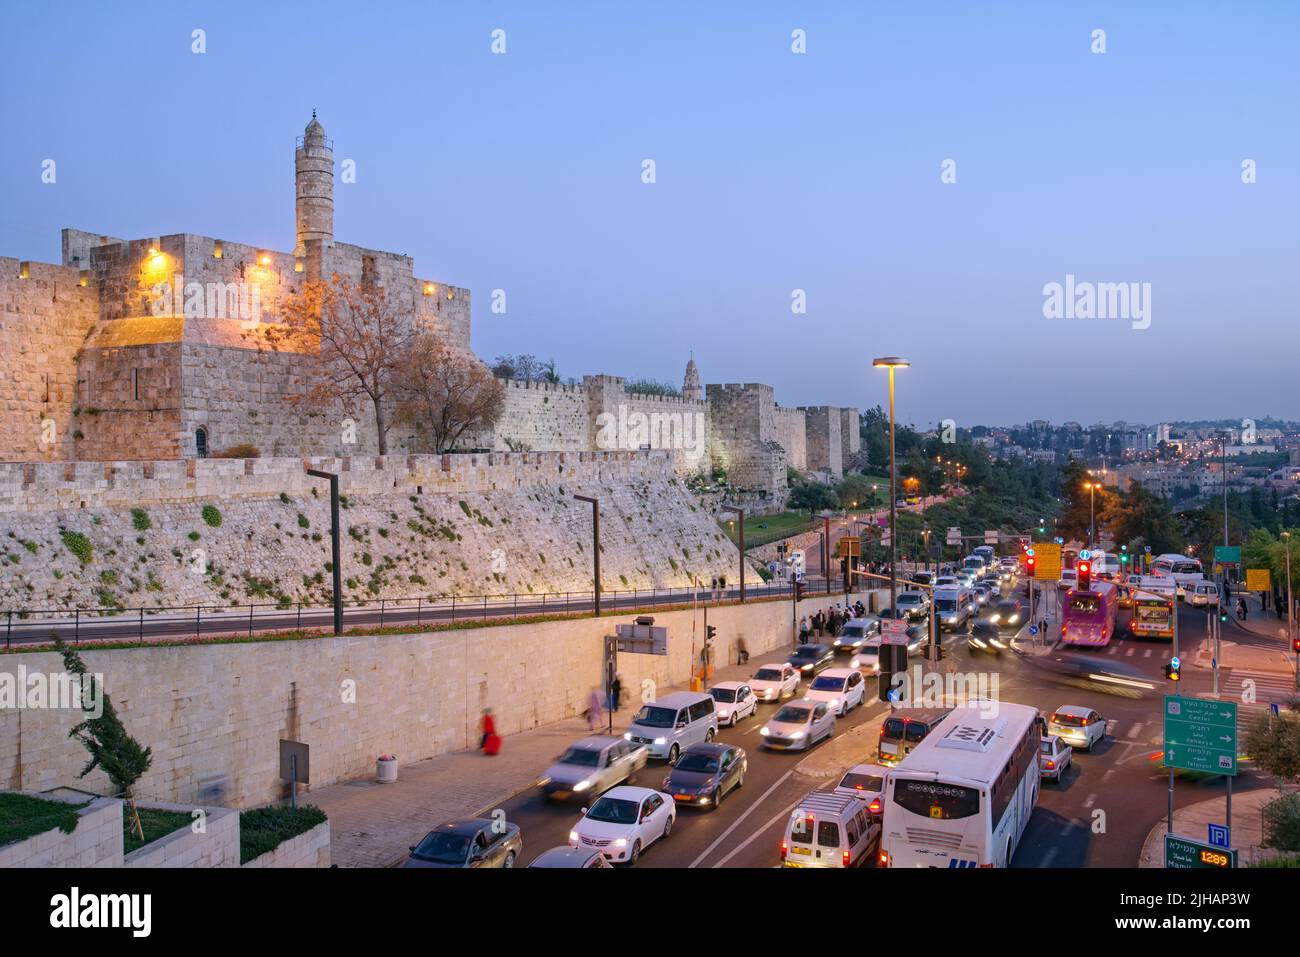 Jerusalem, Israel - March 20, 2014: Car traffic under the walls of the Old City in the night Stock Photo